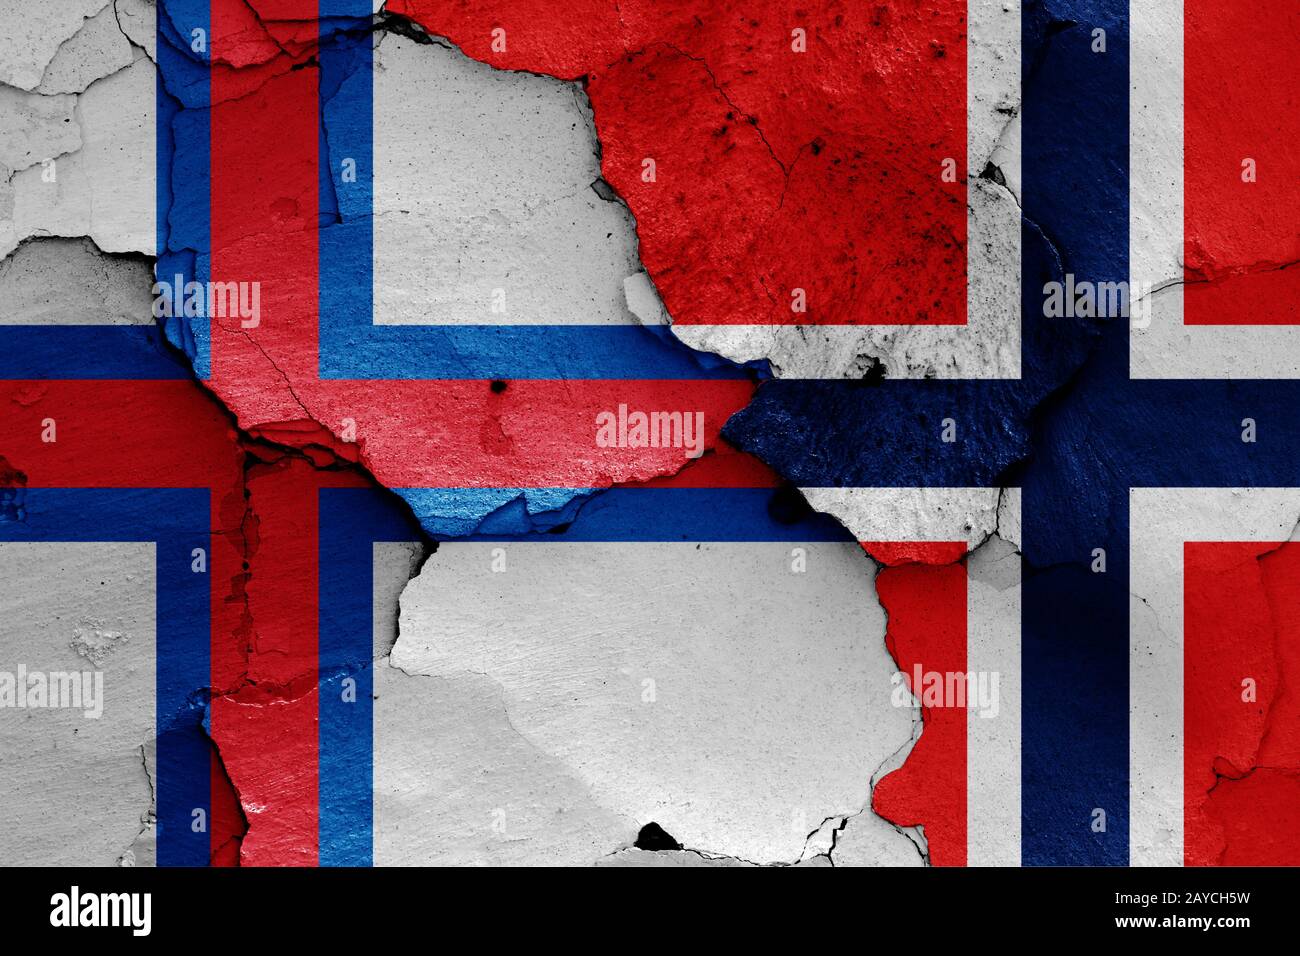 flags of Faroe Islands and Norway painted on cracked wall Stock Photo